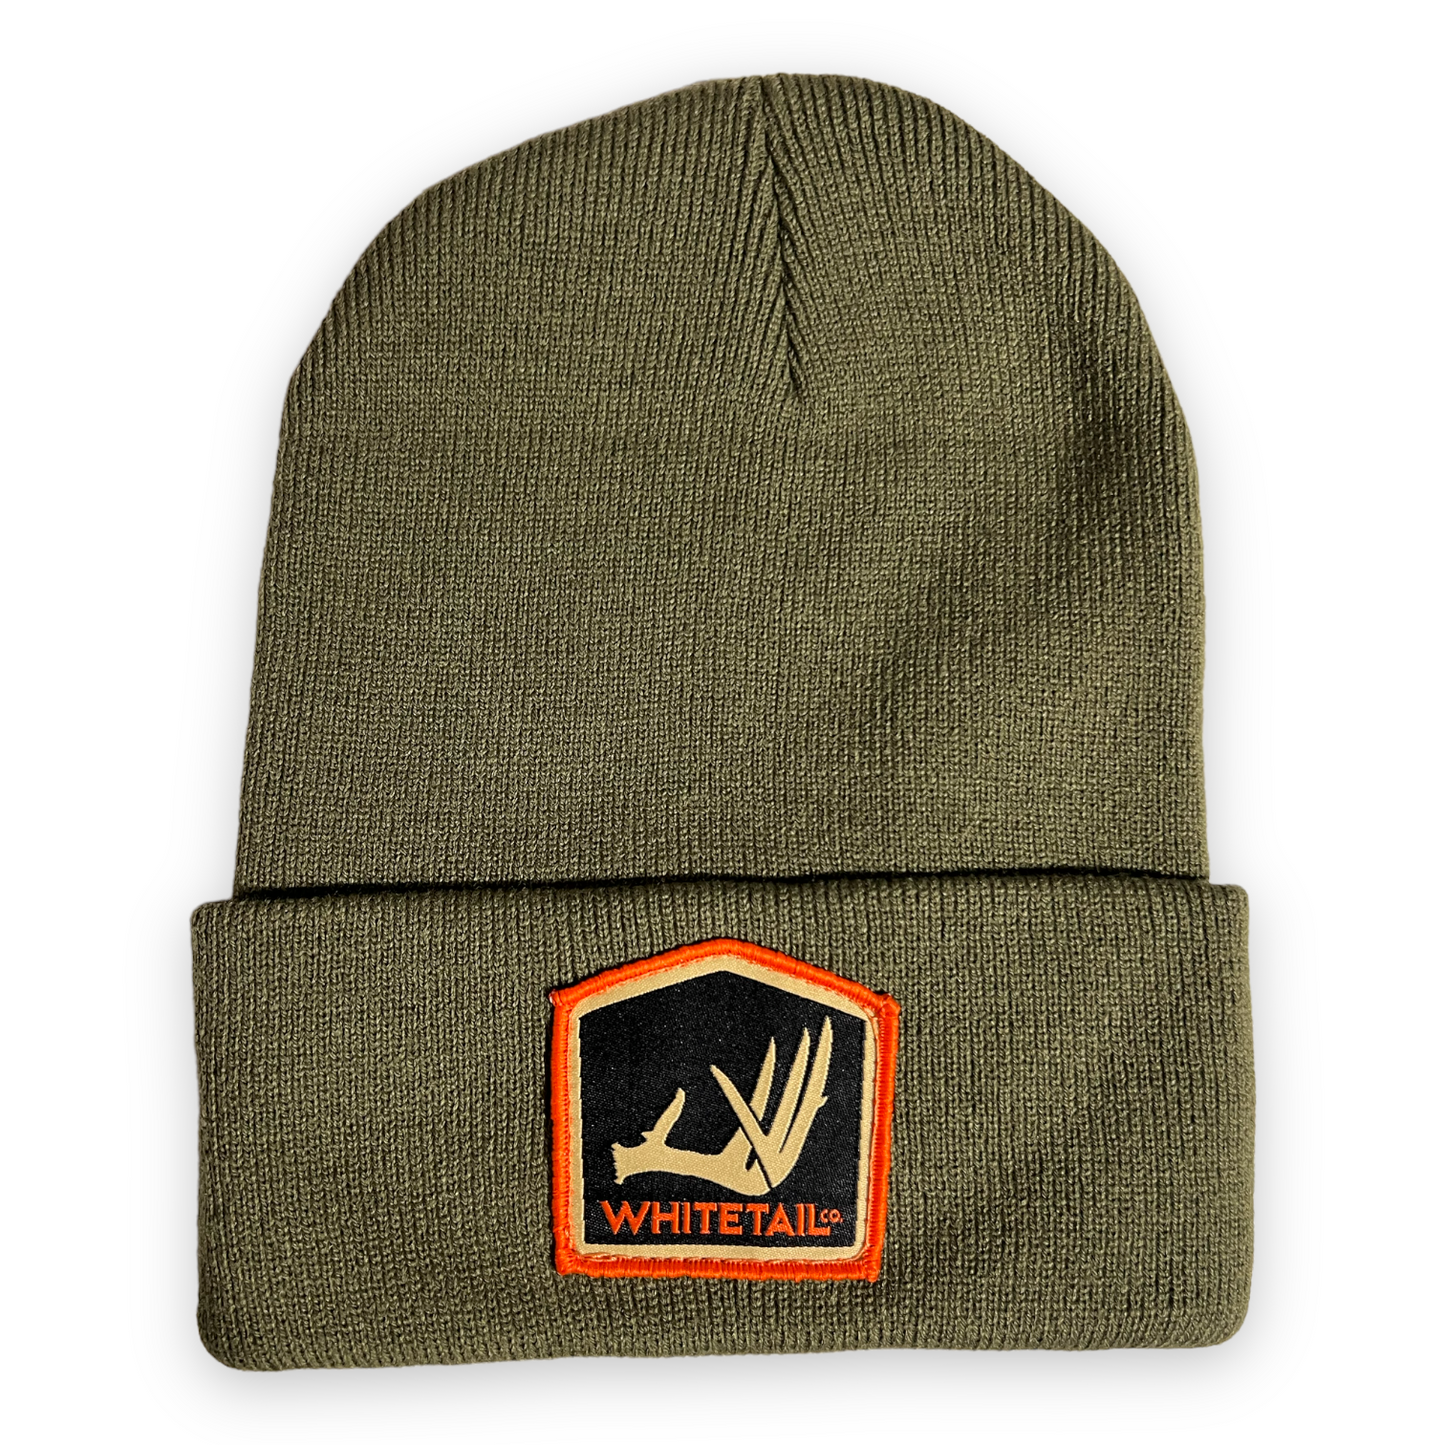 Whitetail Co. Knit Hat Olive Drab